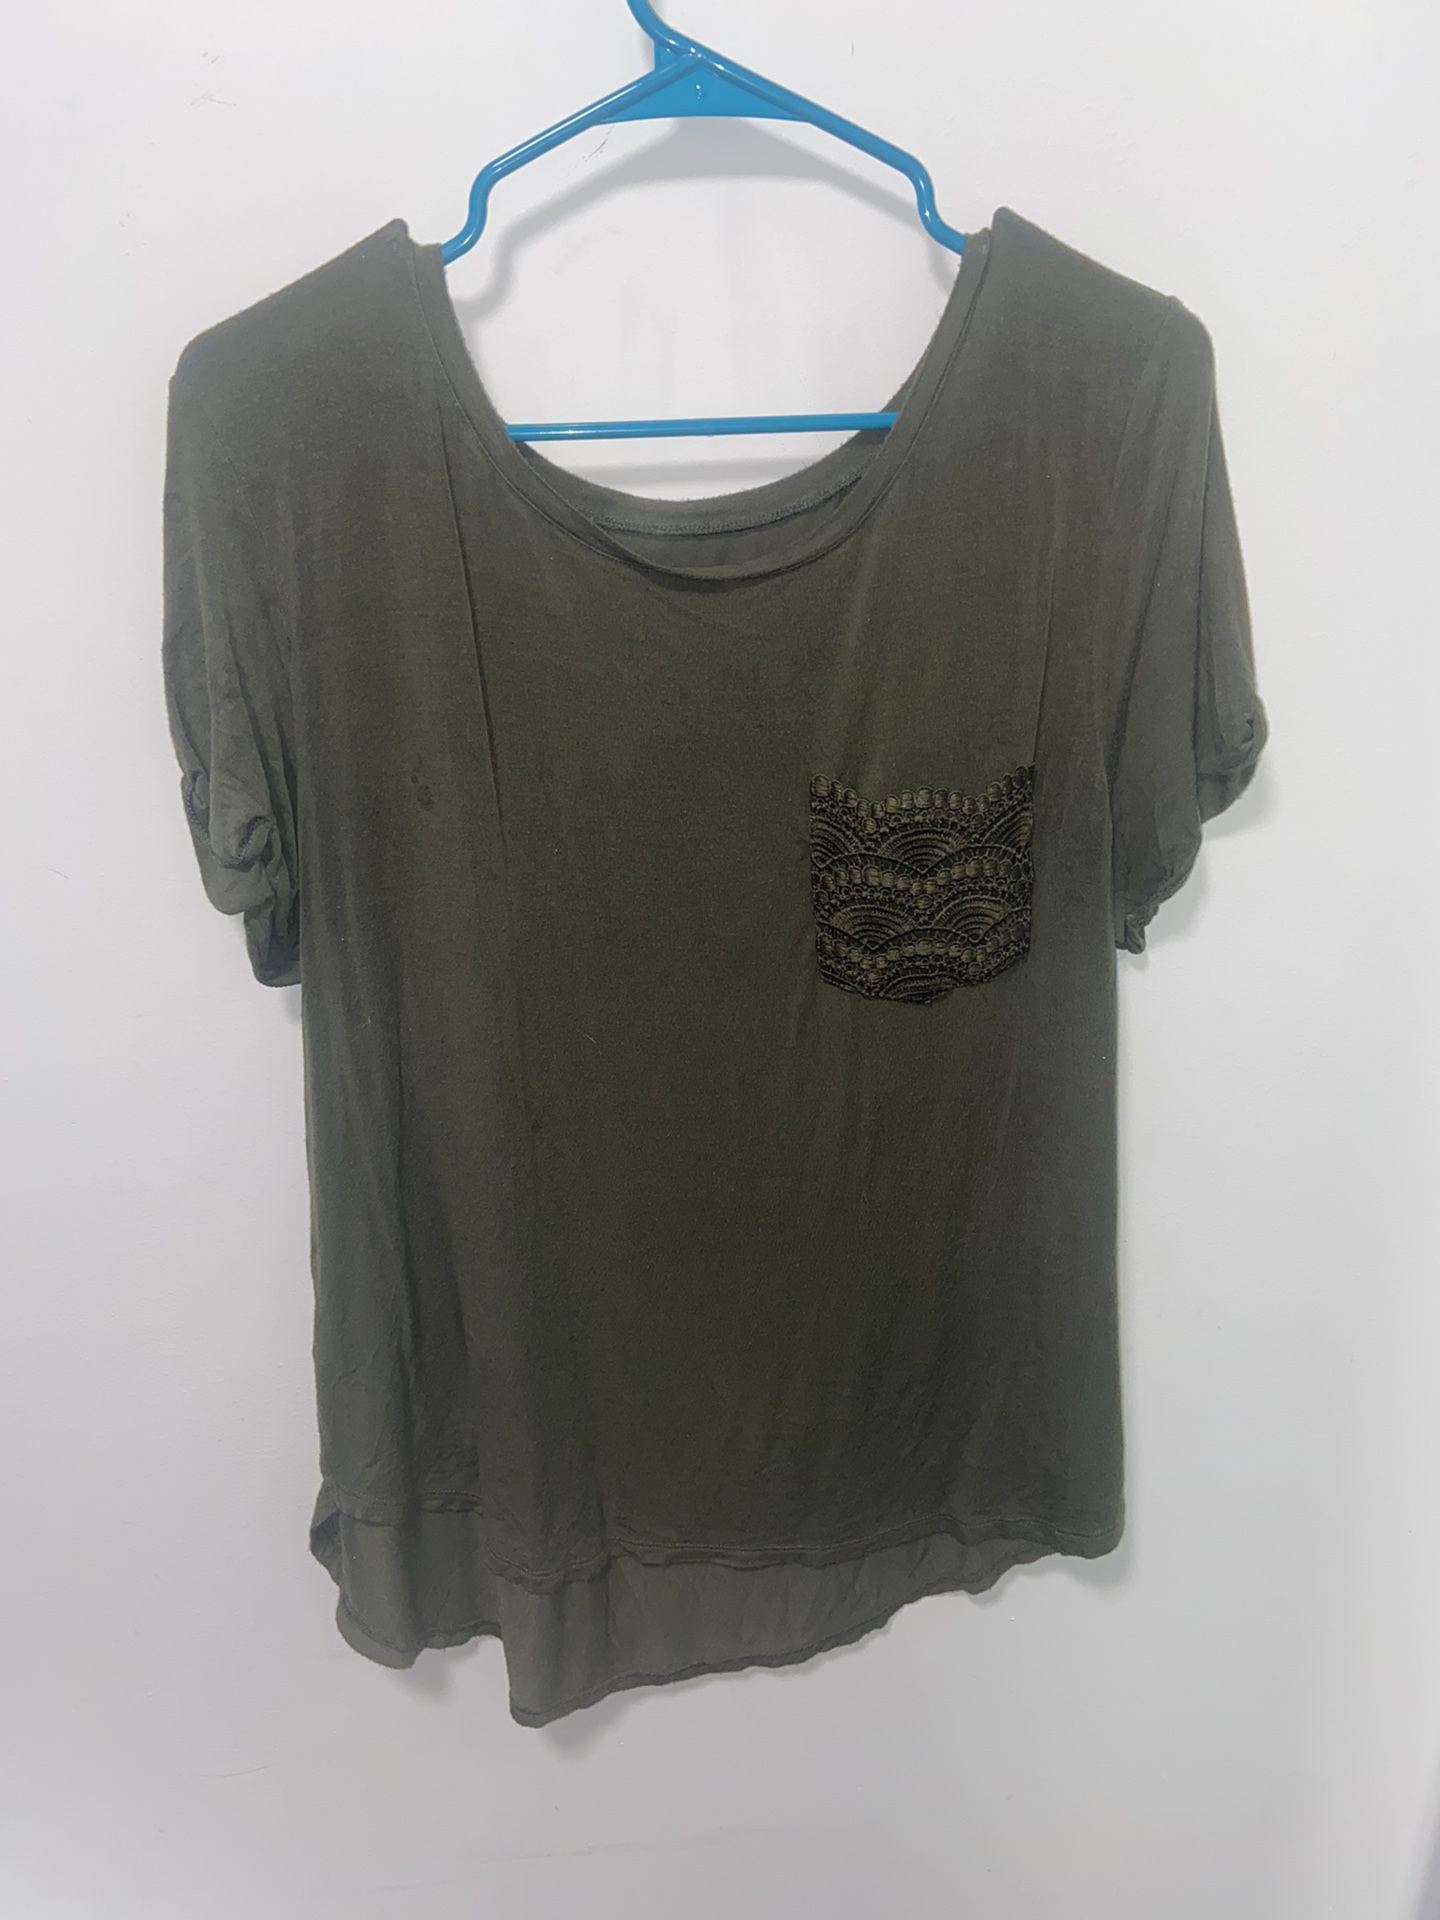 Green Short Sleeve Casual Shirt With Designed Pocket💚